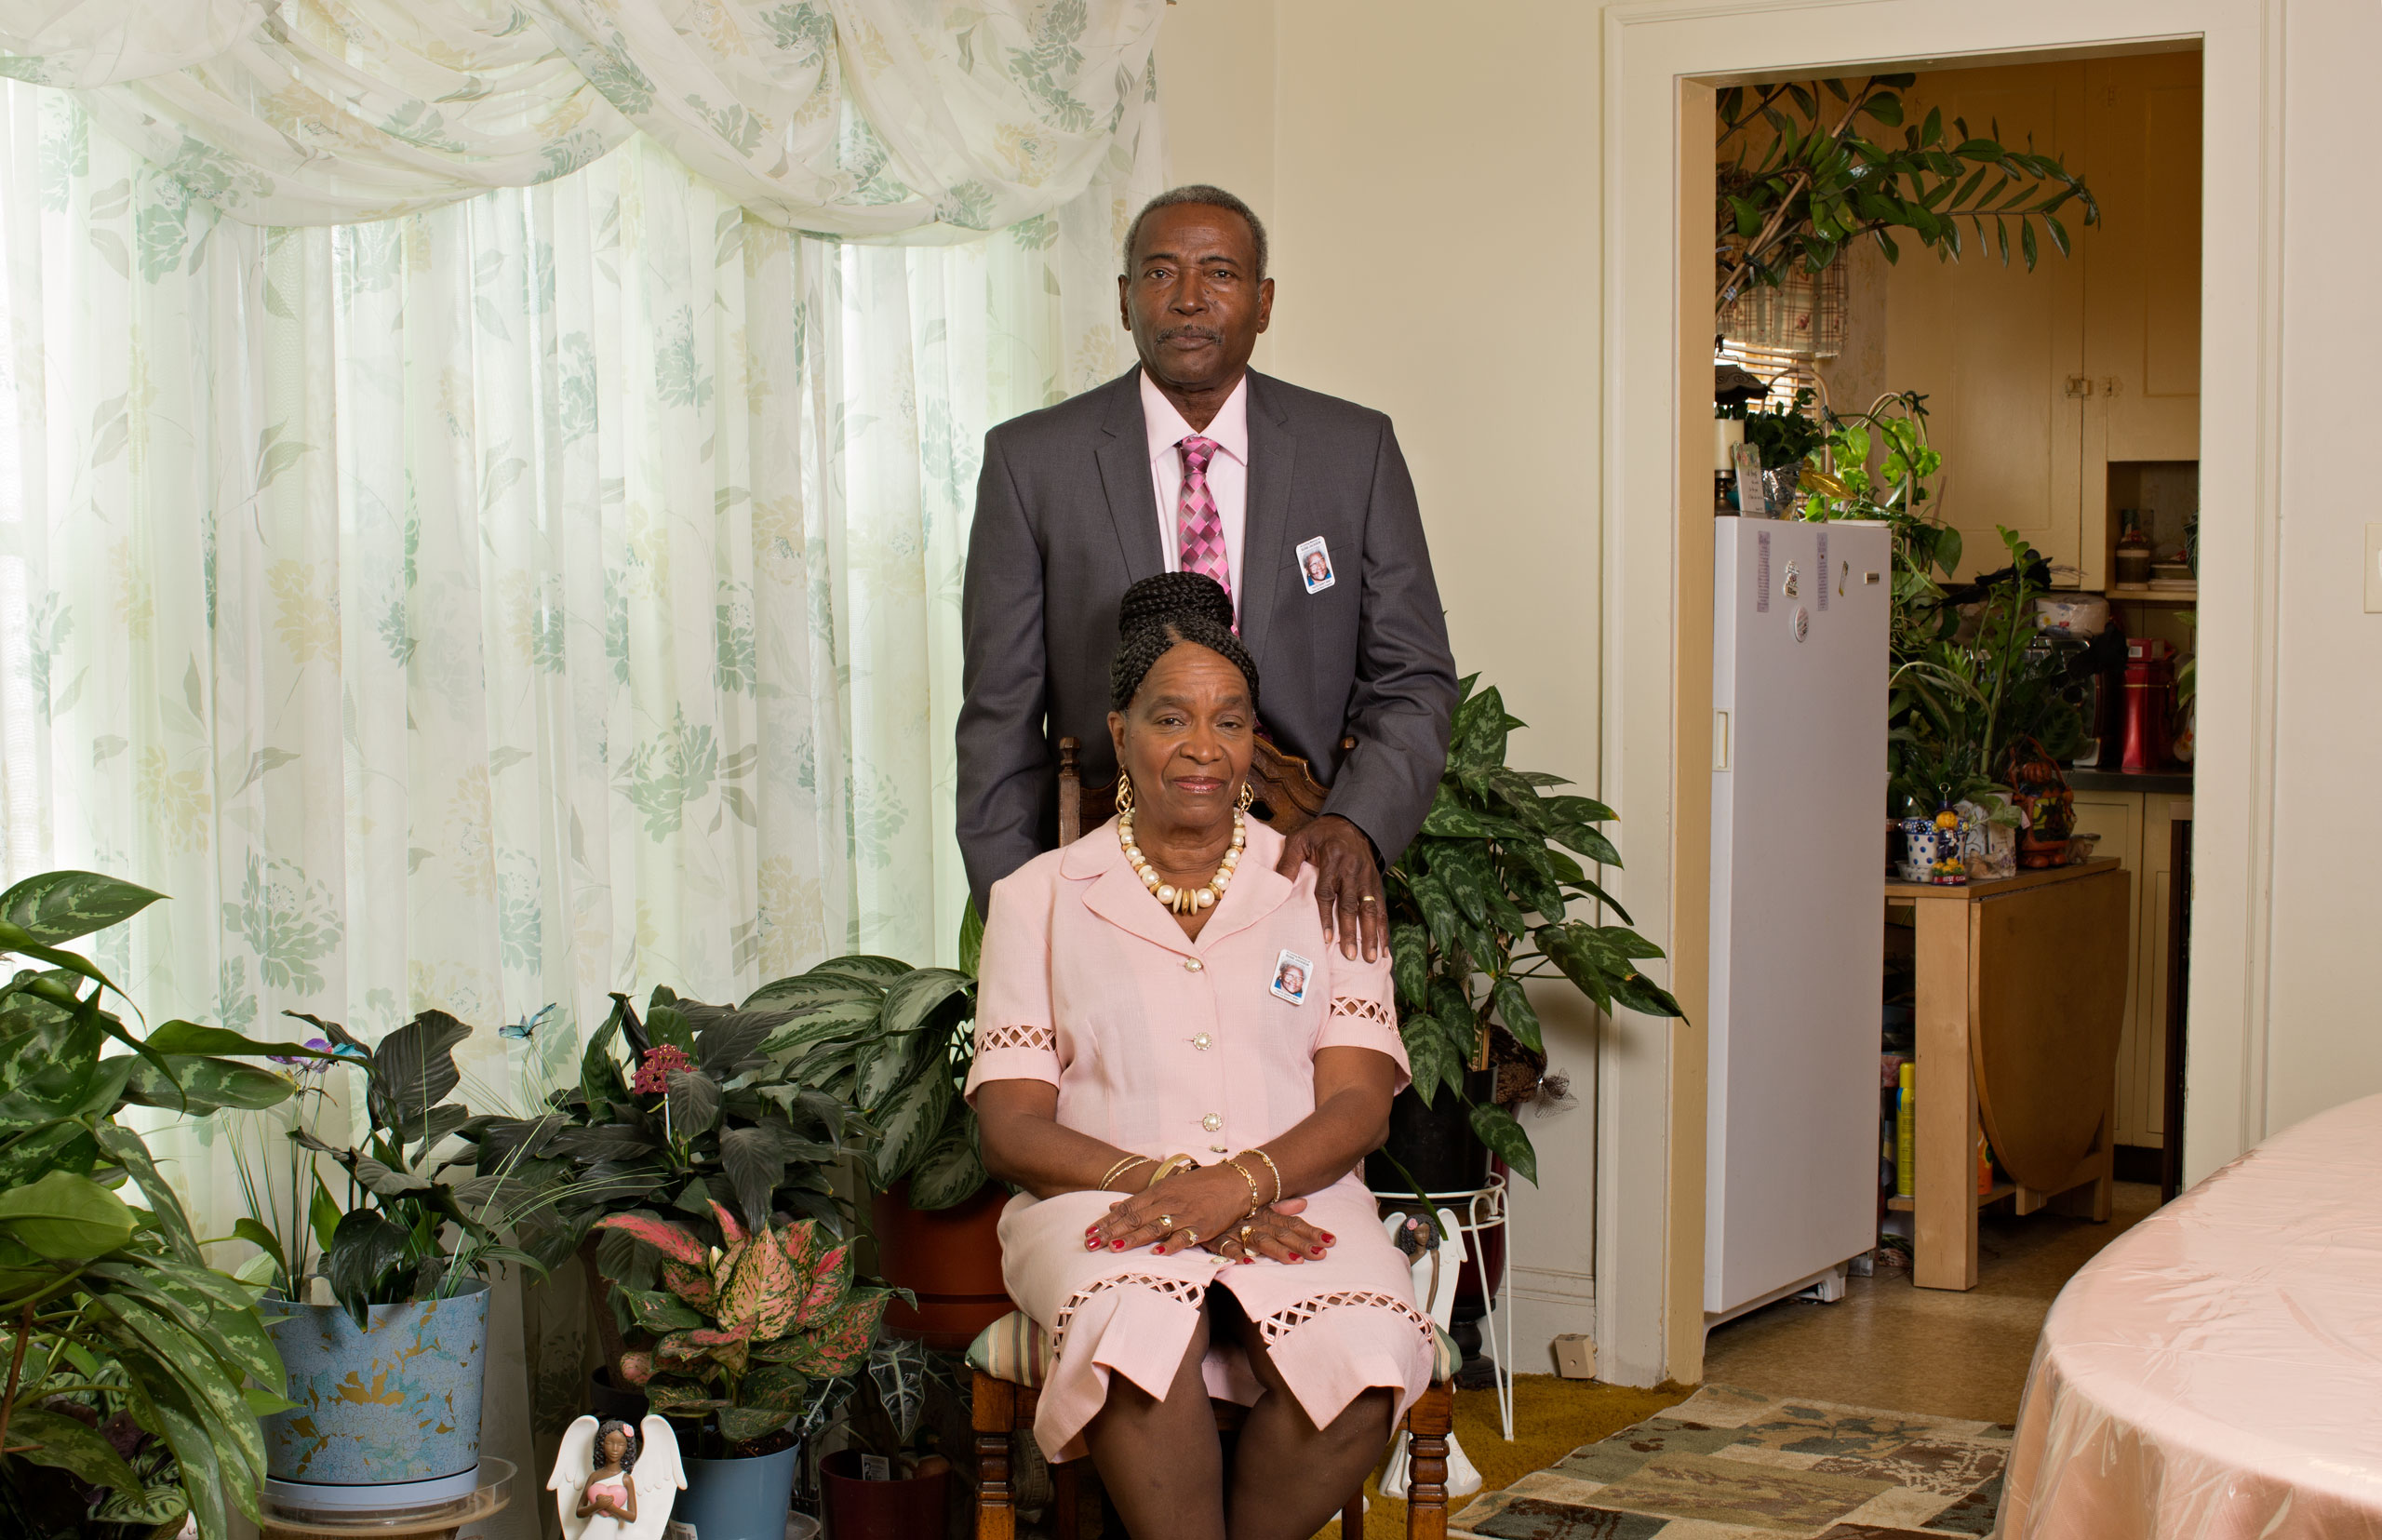 Walter and  Ellenora Jackson
                              
                              Susie Jackson’s only child and his wife in their home in Cleveland. Walter said his mother’s joy made her who she was